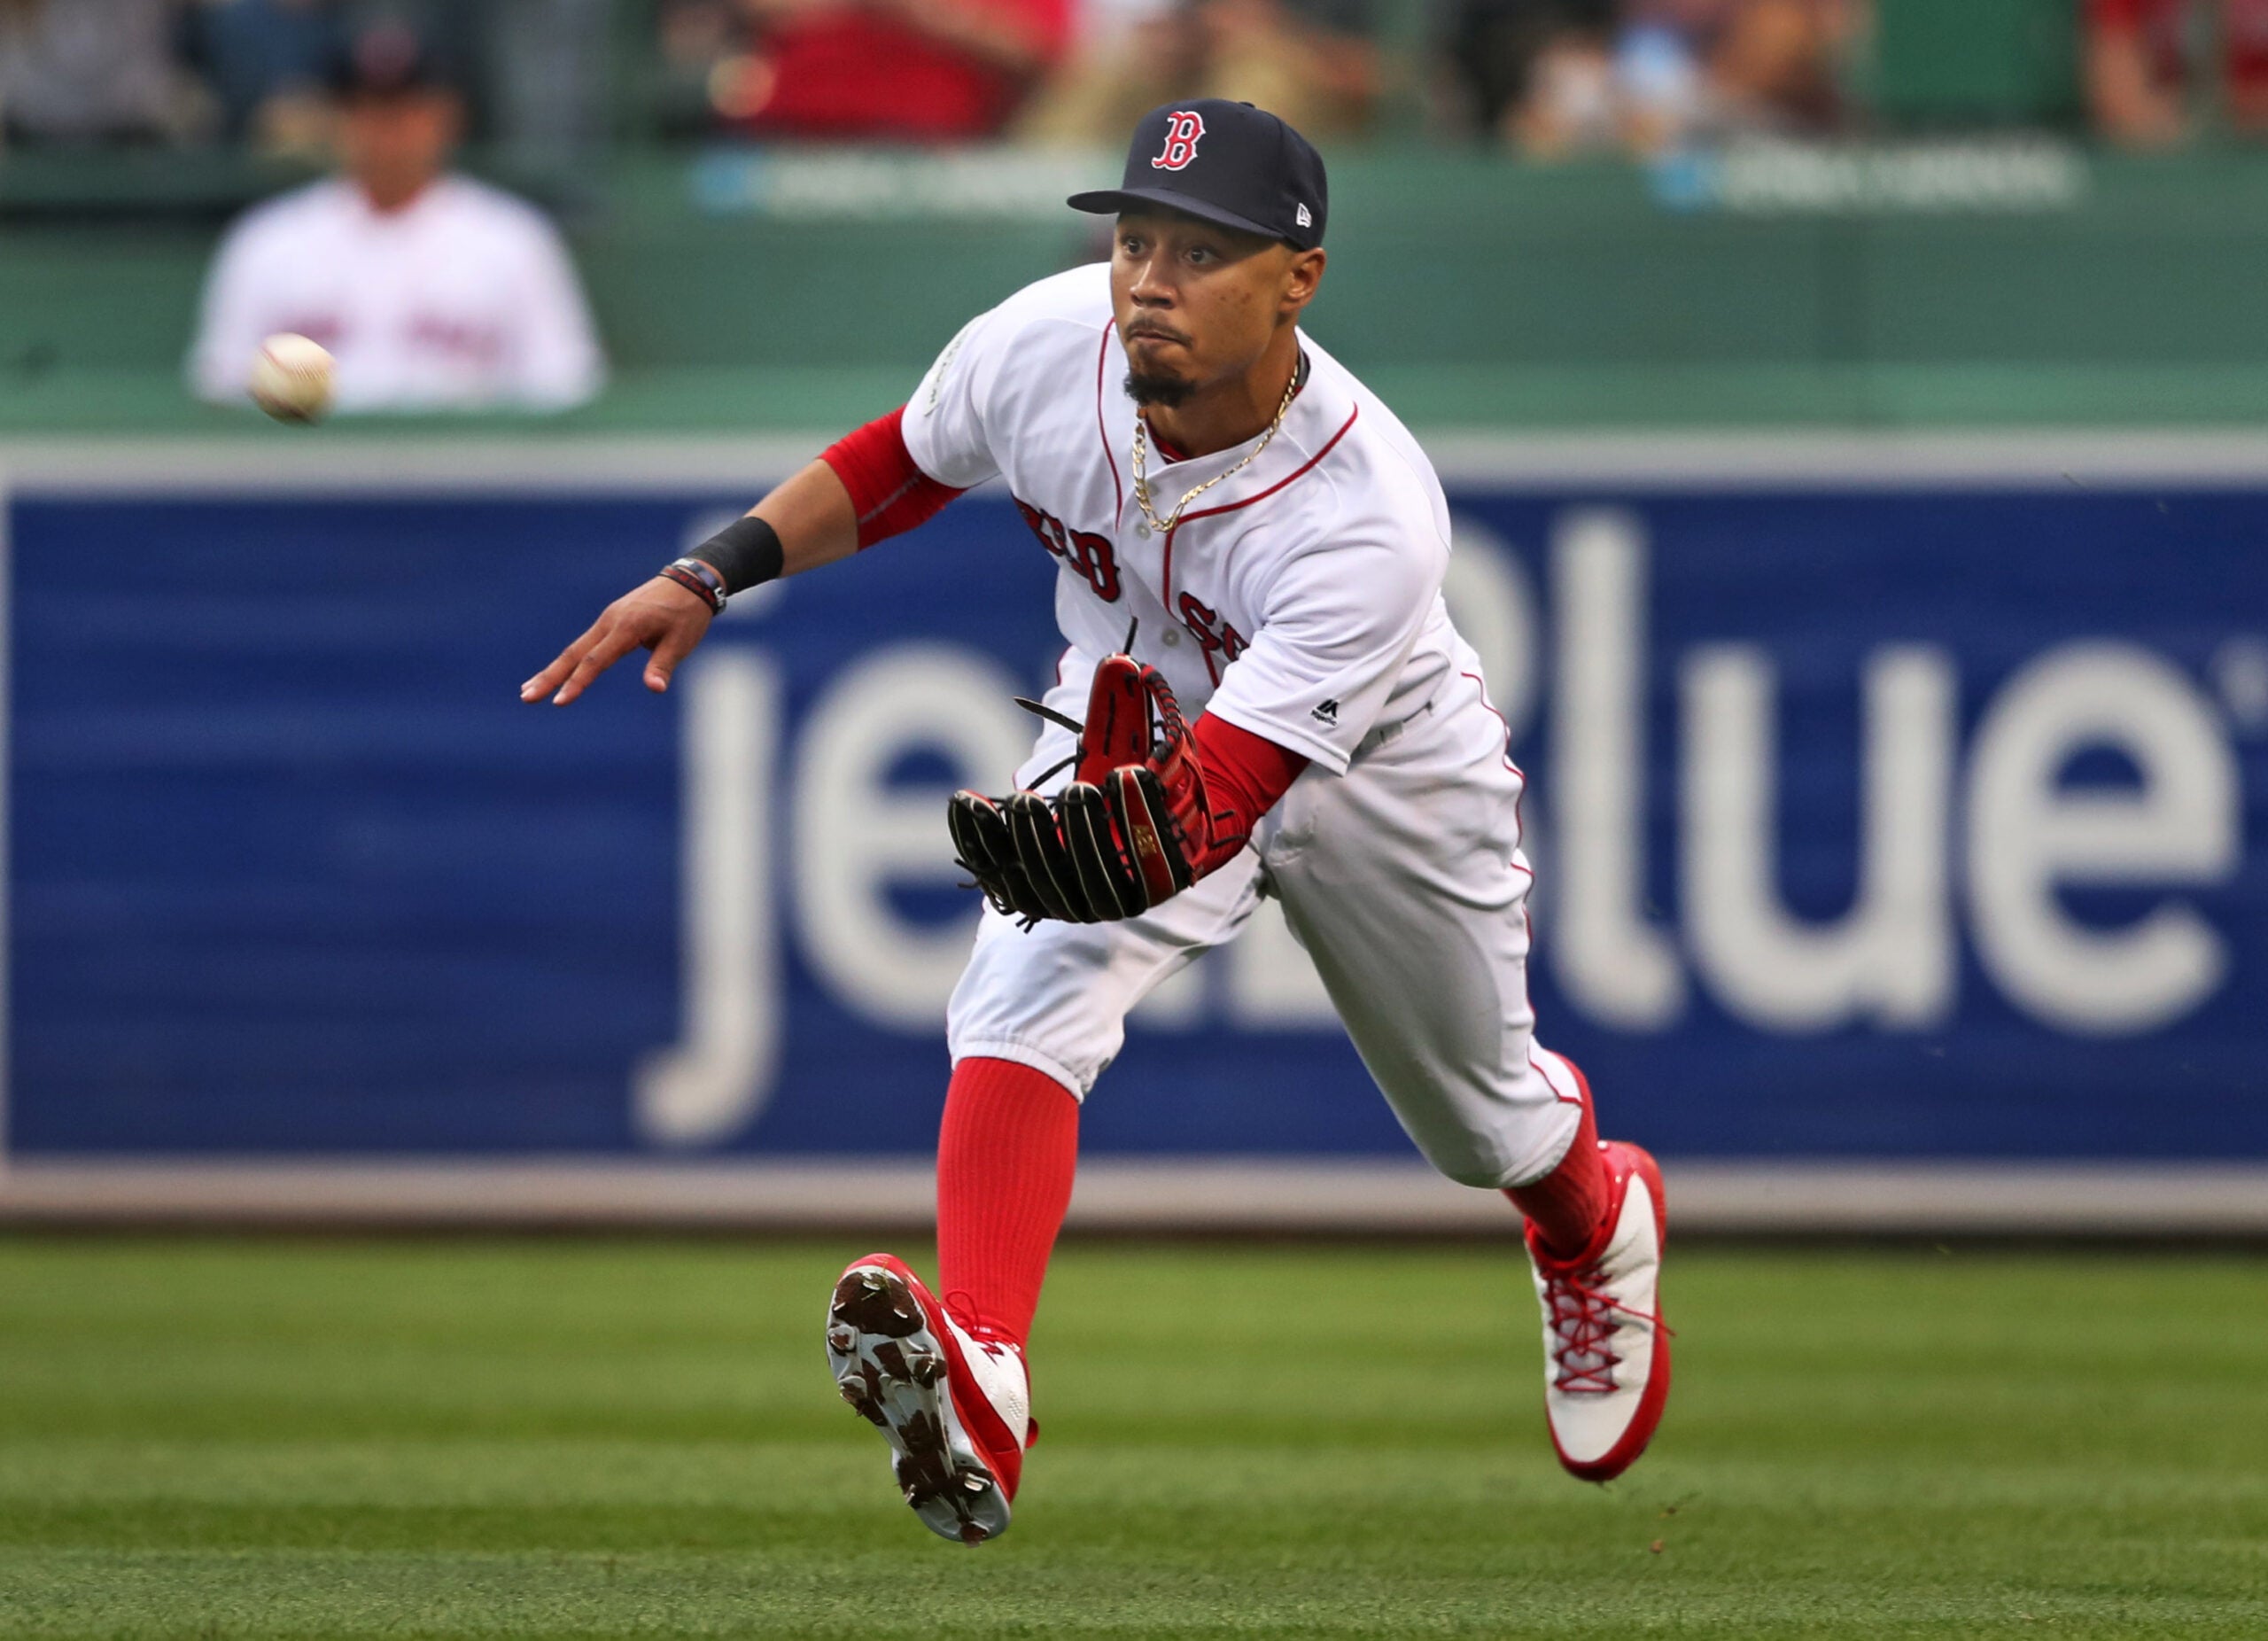 Mookie Betts 2019 Highlights (Red Sox outfielder reportedly traded